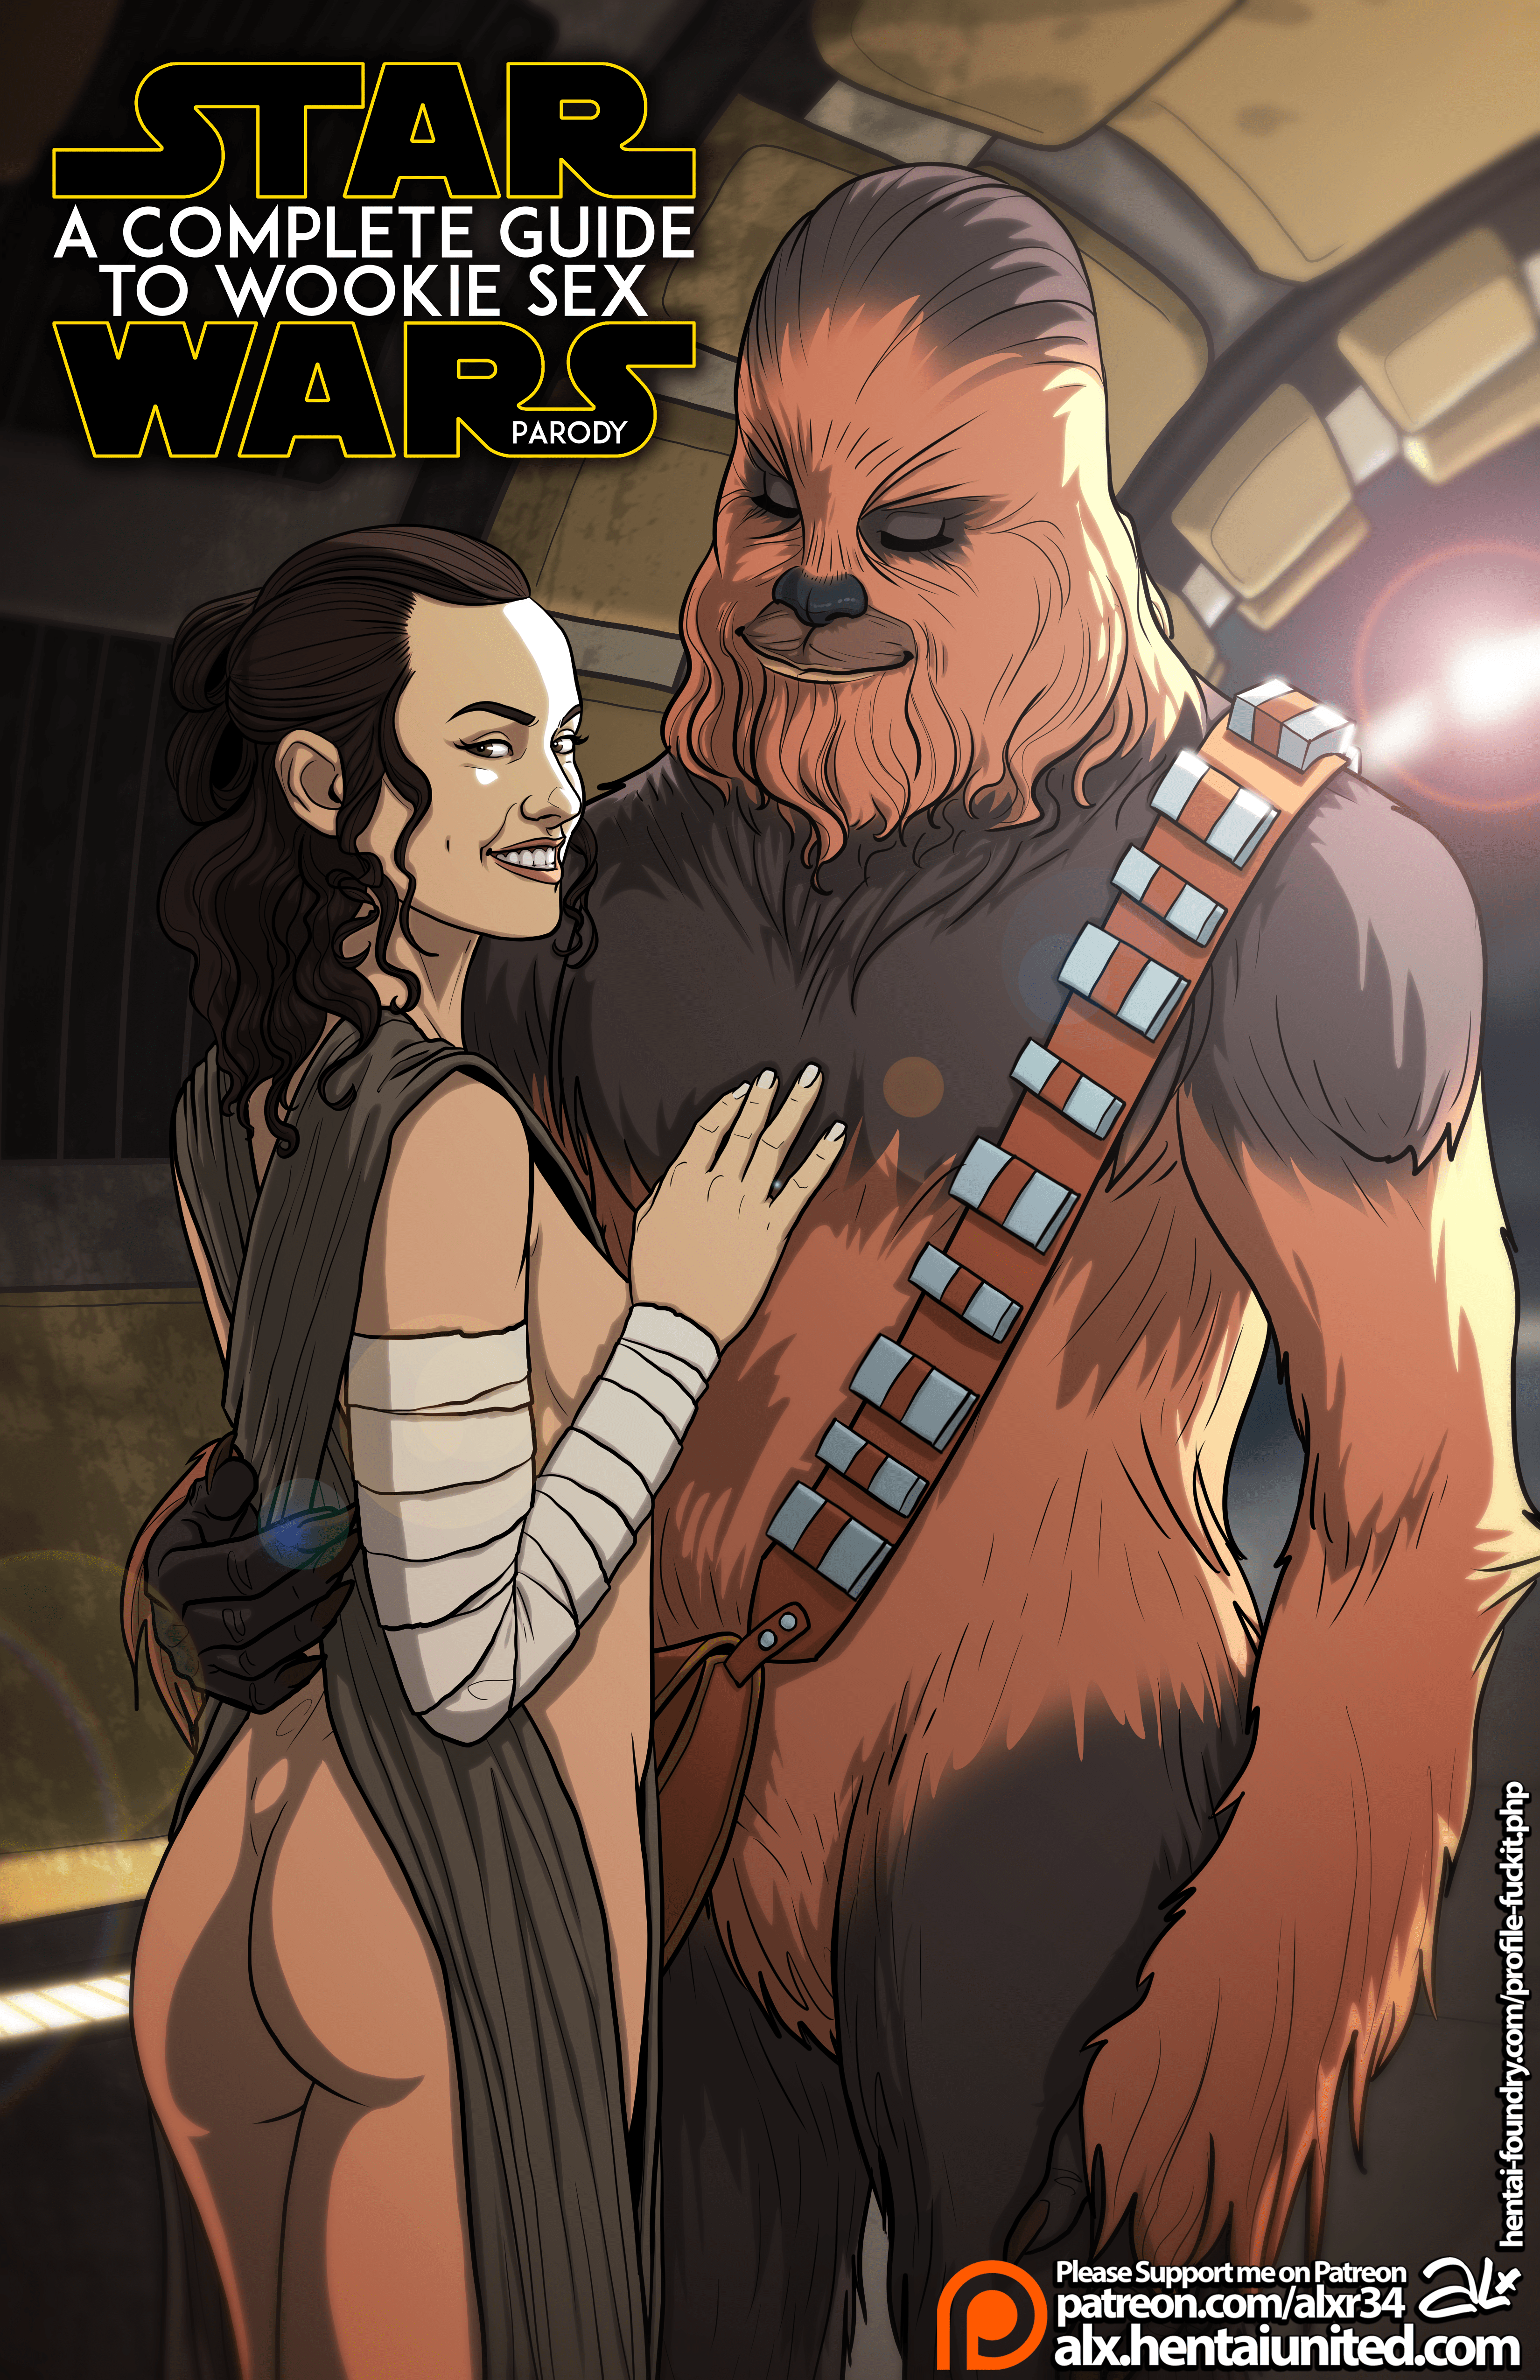 War Porn - Star Wars A Complete Guide to Wookie Sex Parody Sex Comics ...